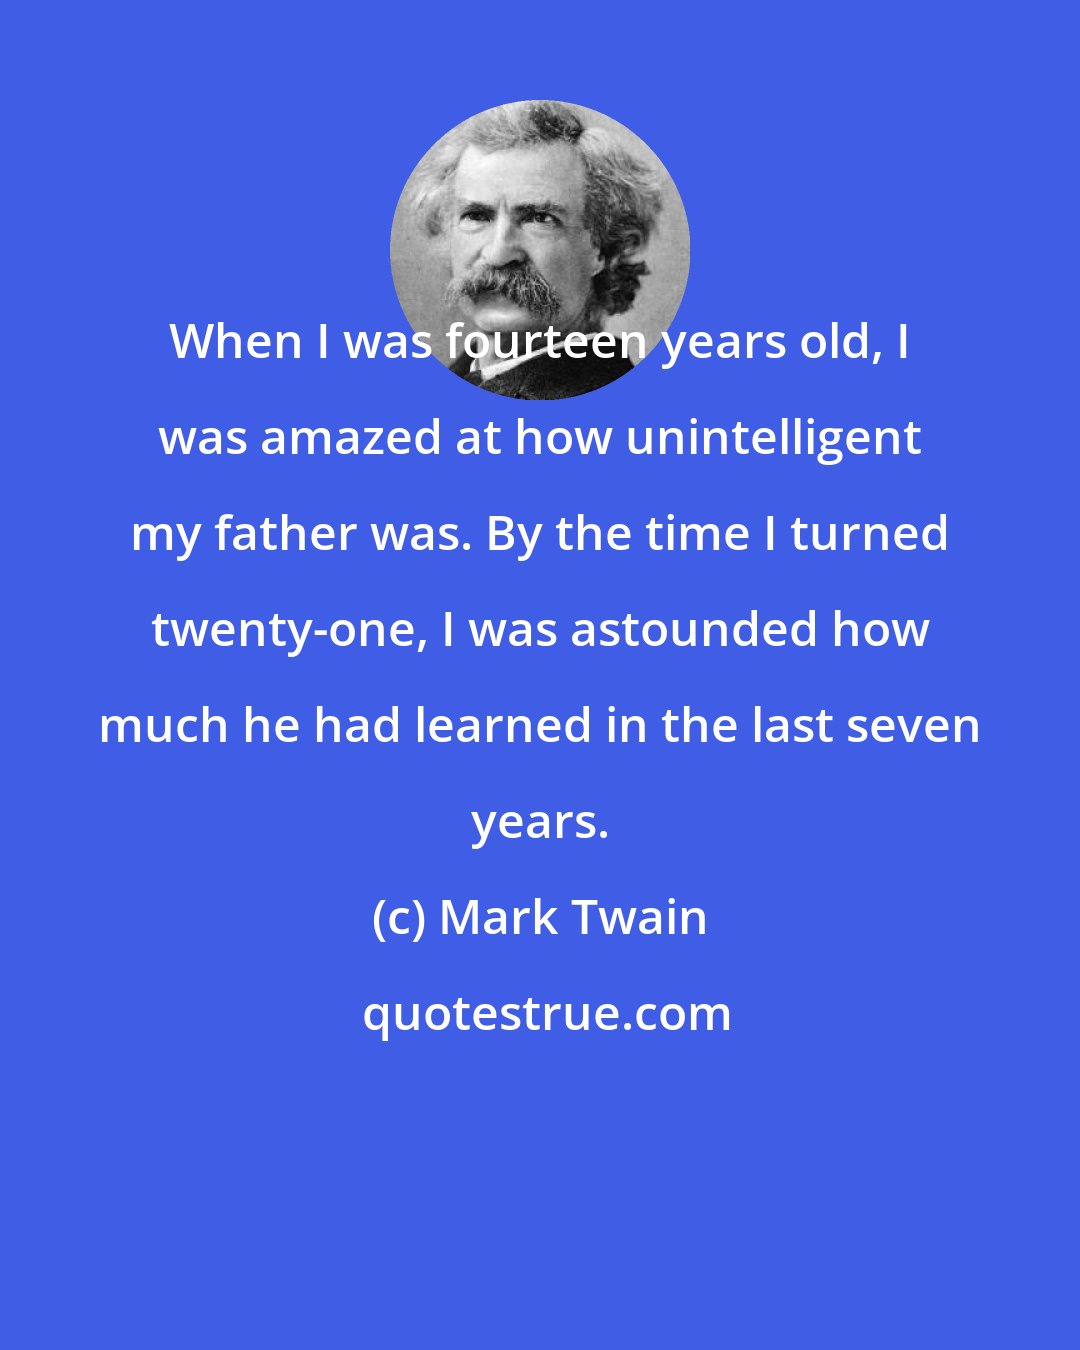 Mark Twain: When I was fourteen years old, I was amazed at how unintelligent my father was. By the time I turned twenty-one, I was astounded how much he had learned in the last seven years.